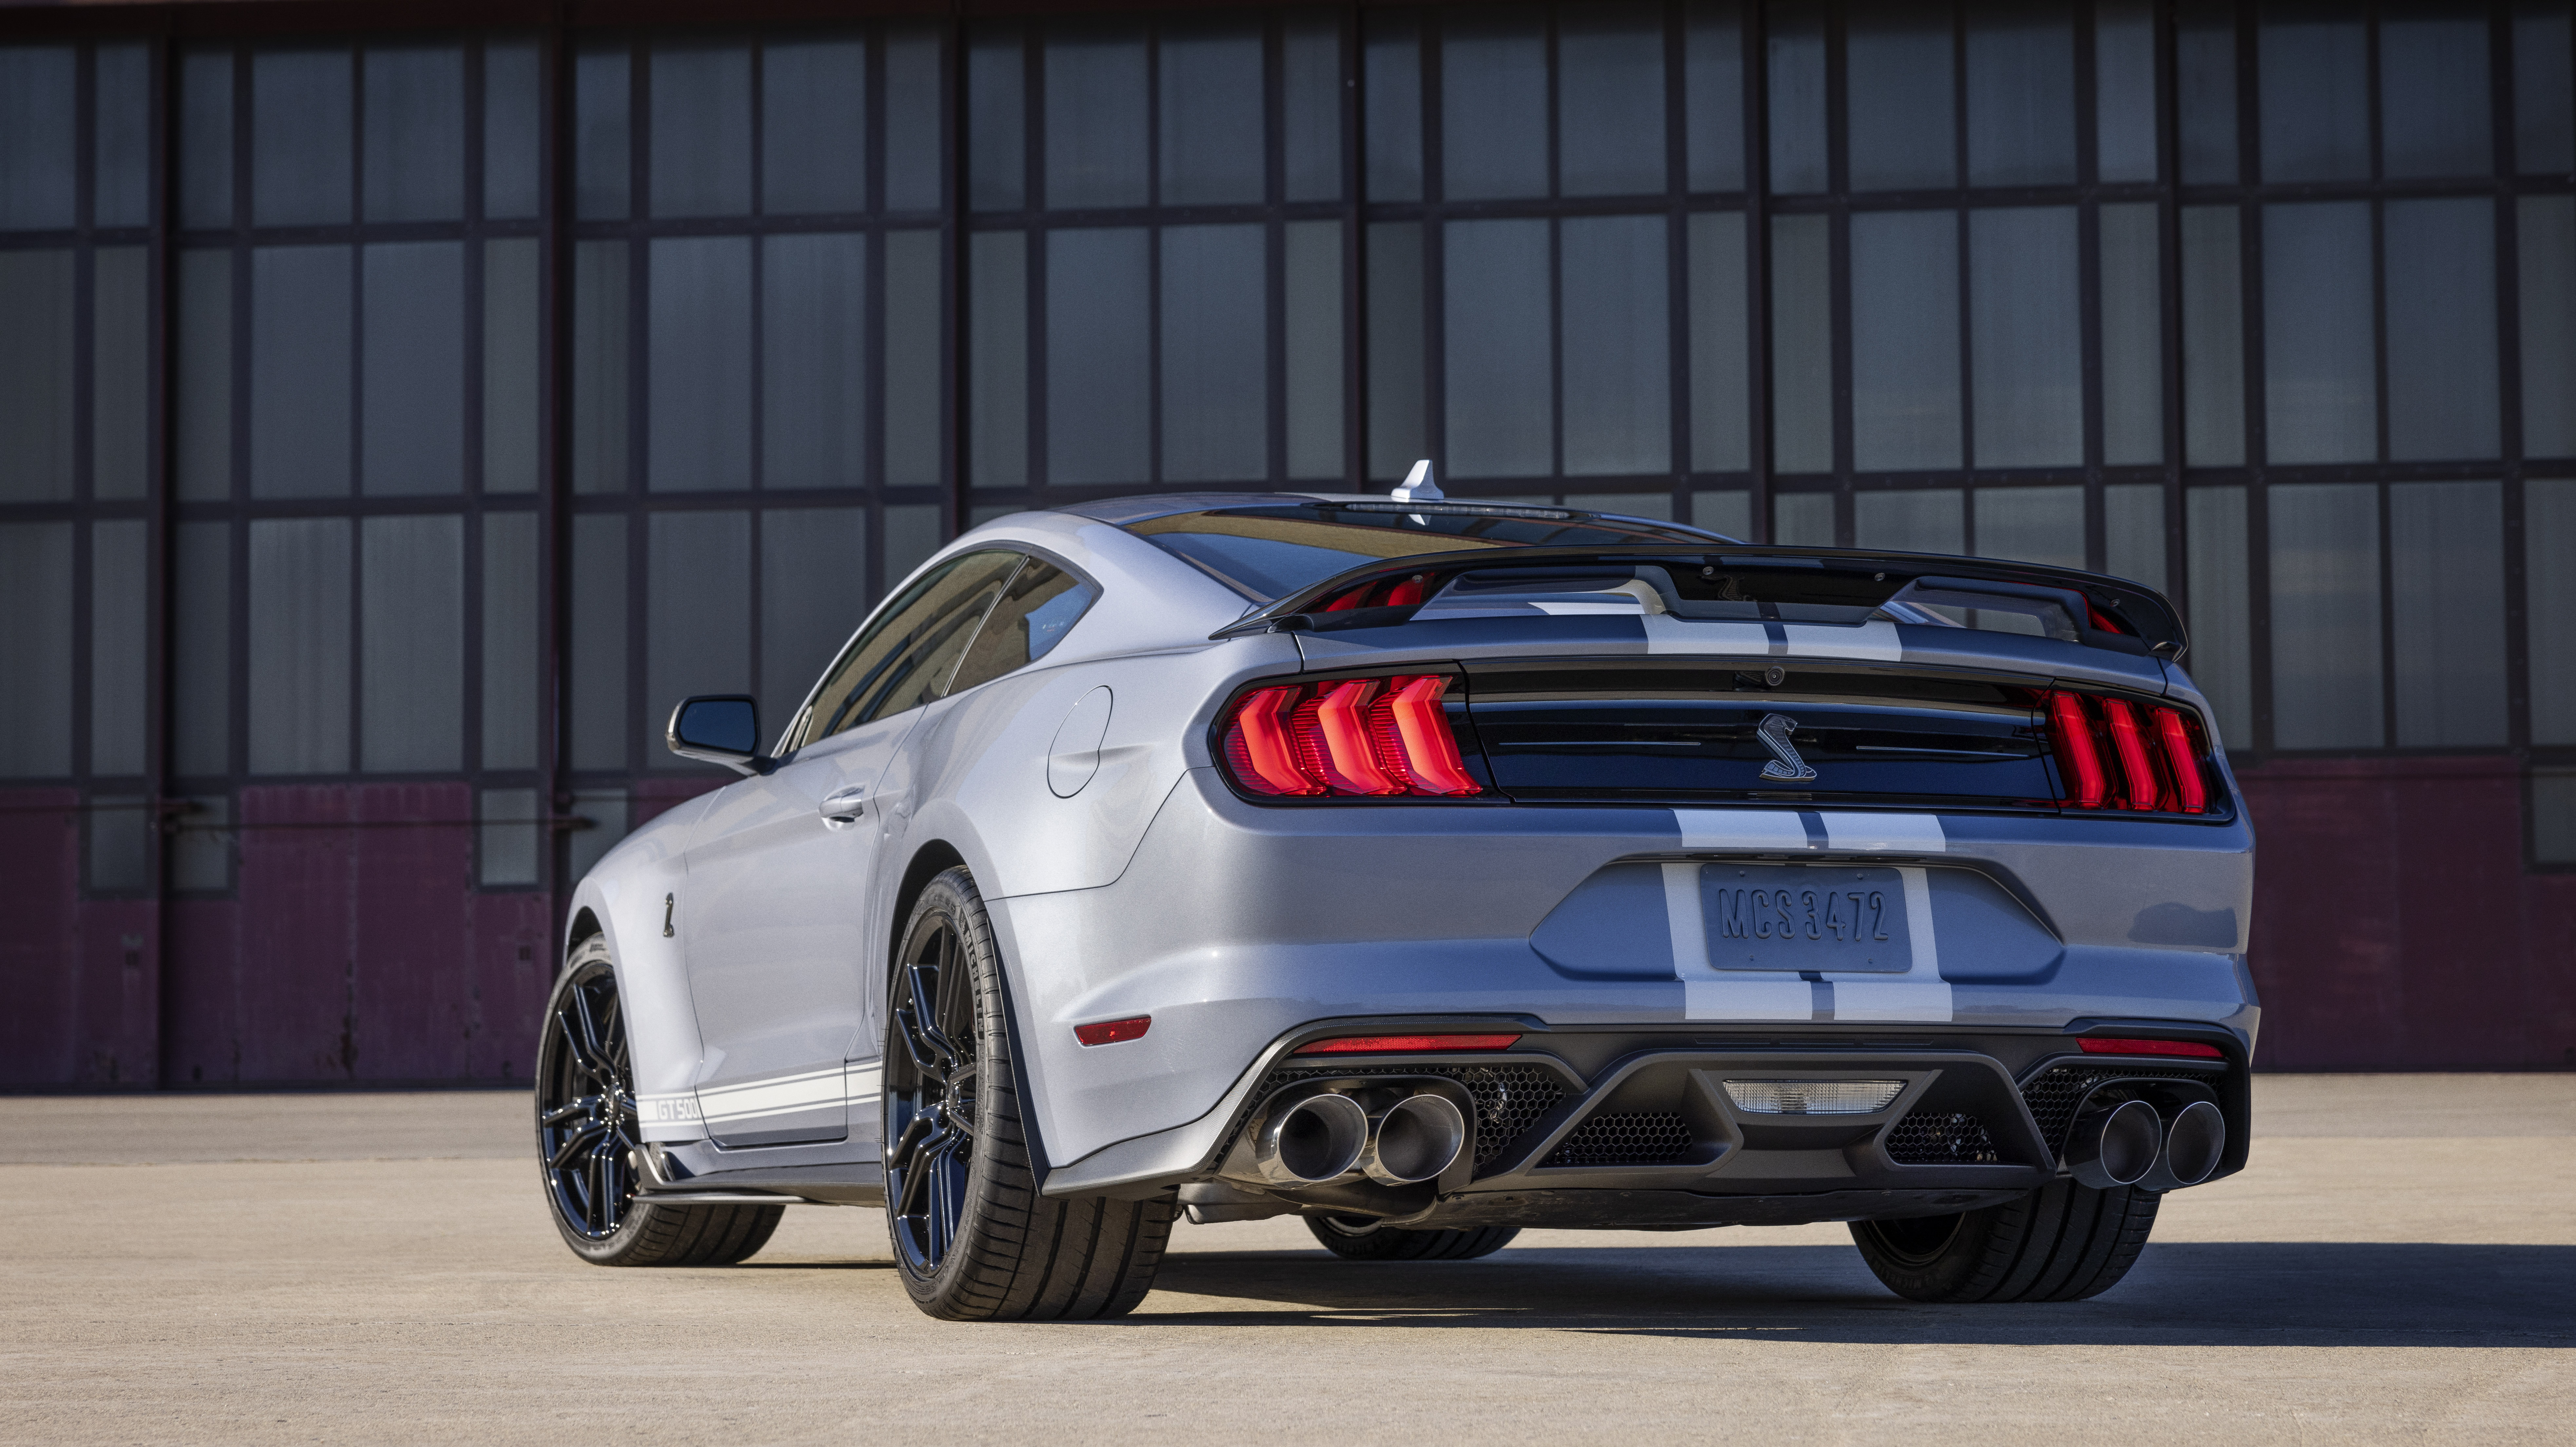 Mustang Family Grows with New Limited-Edition 2022 Mustang Shelby GT500  Heritage Edition, First-ever Mustang Coastal Edition, Plus Ford  Performance-Exclusive Code Orange Paint